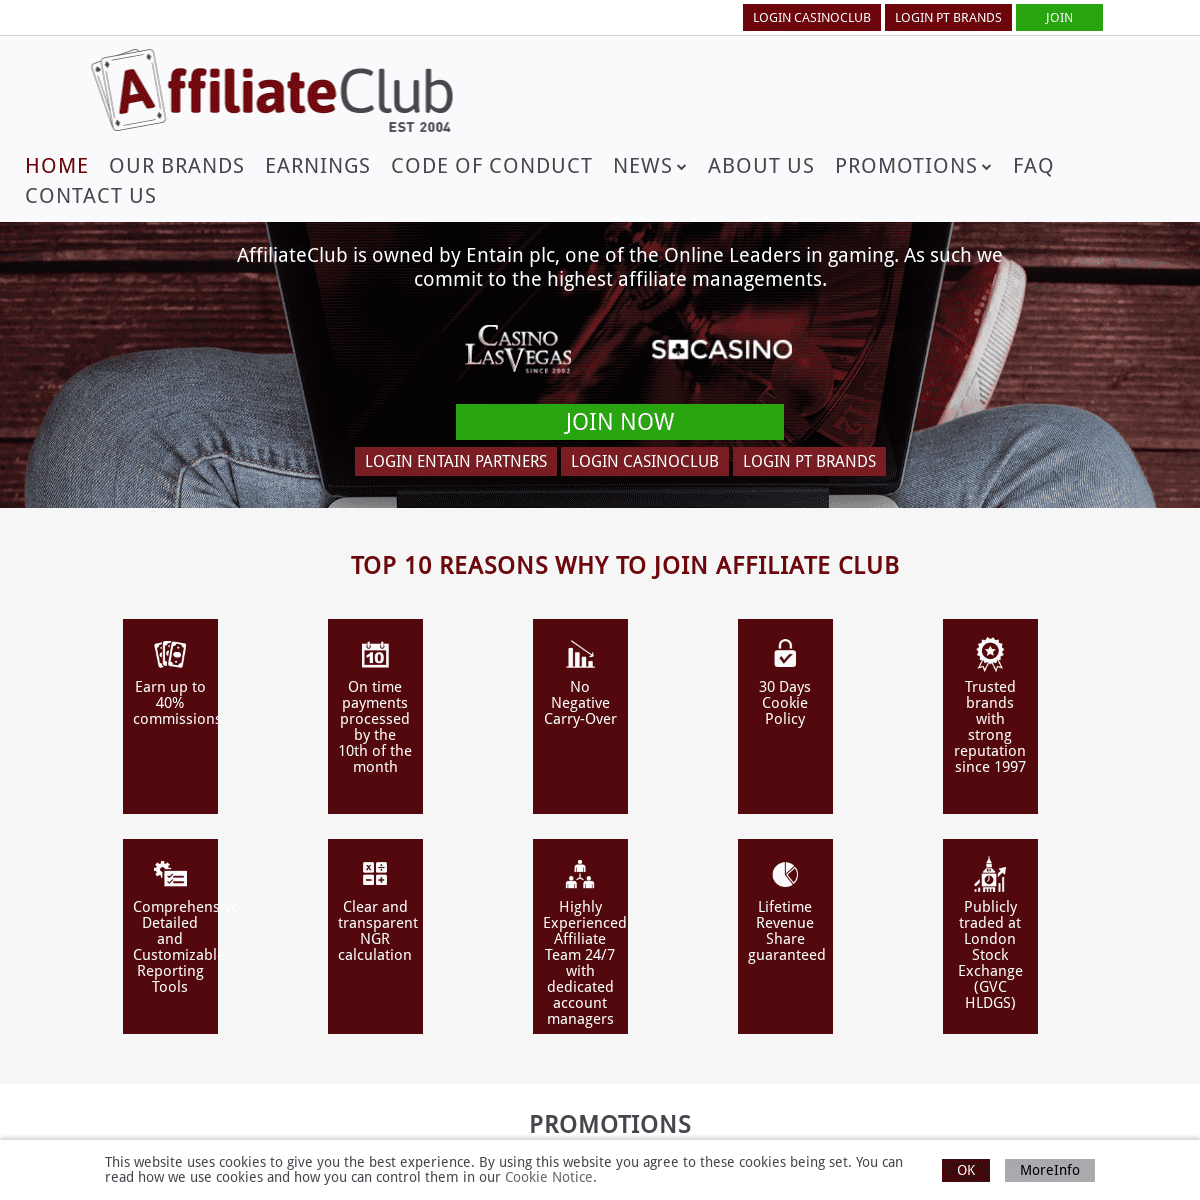 A complete backup of https://affiliateclub.com